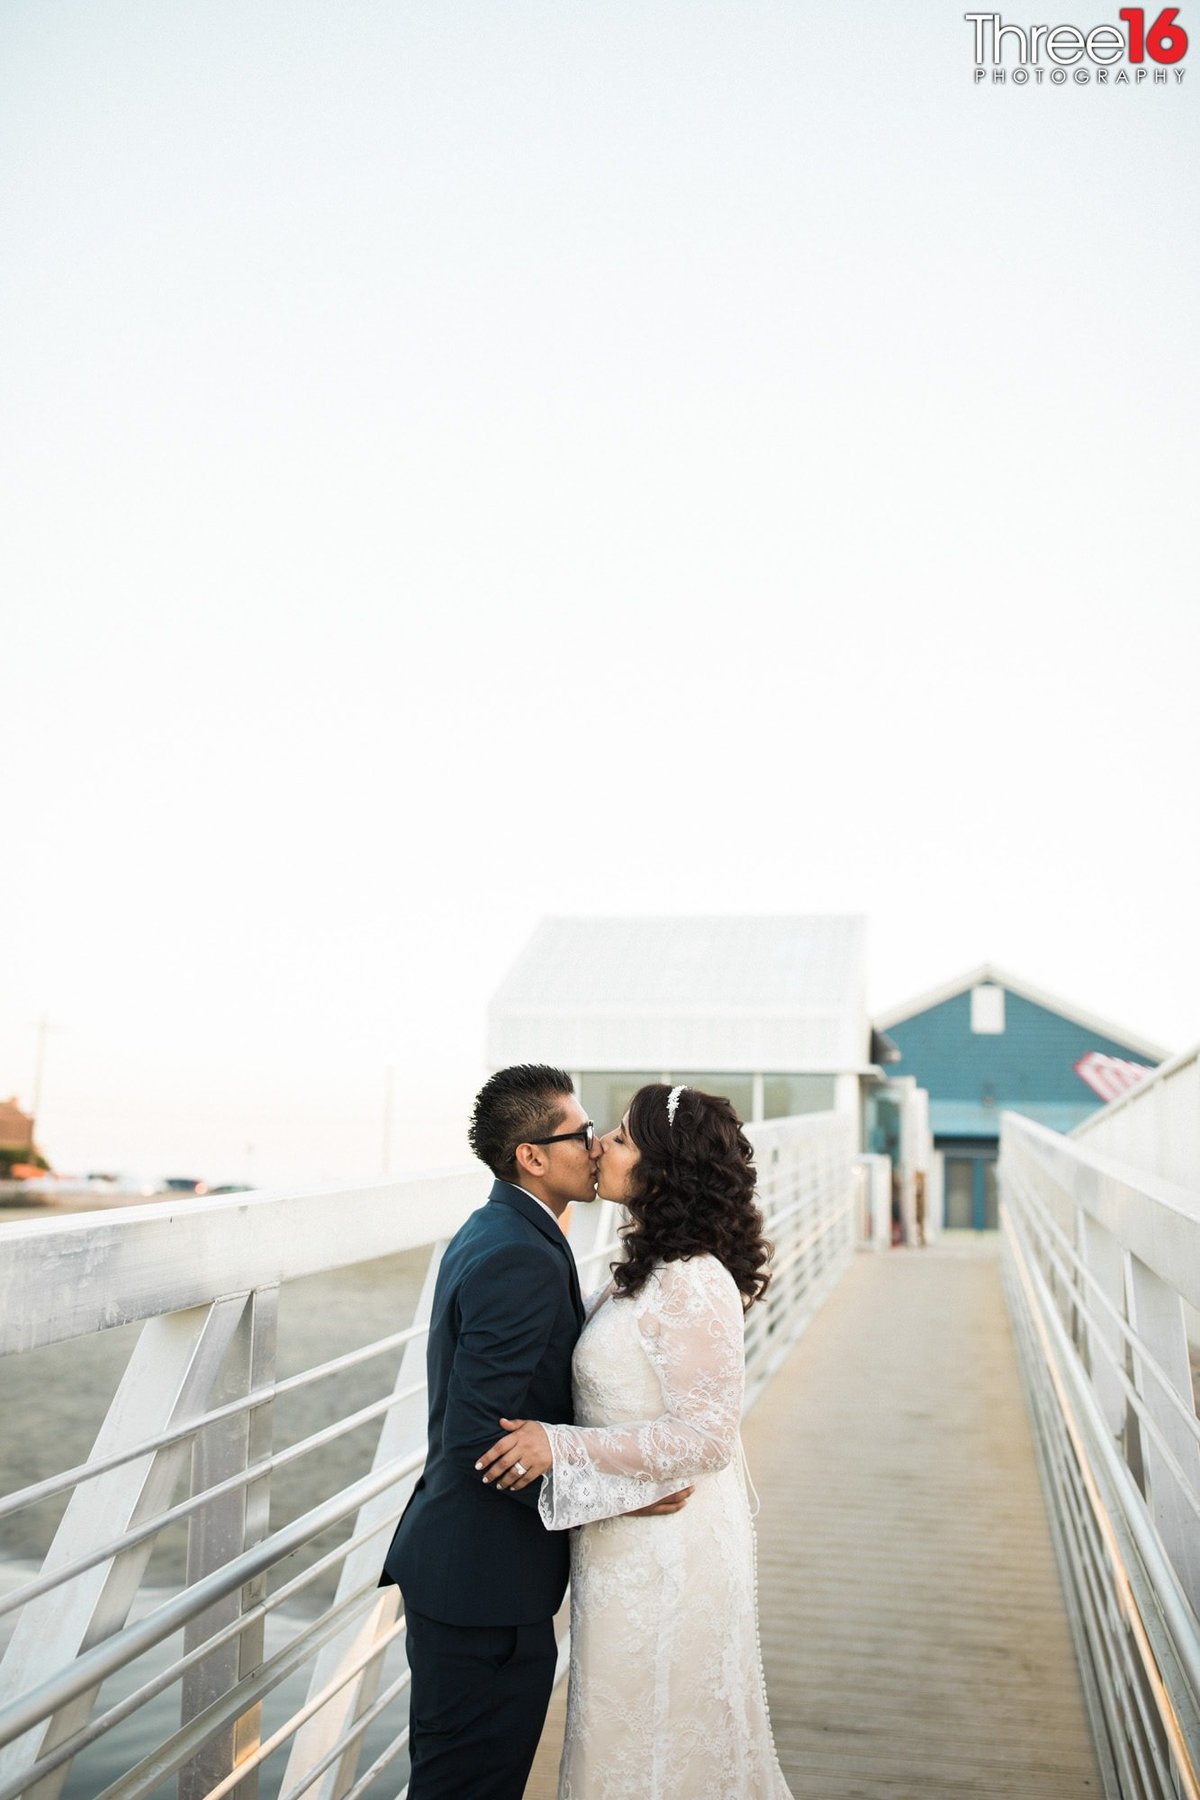 Bride and Groom stop on the boat ramp to share a kiss